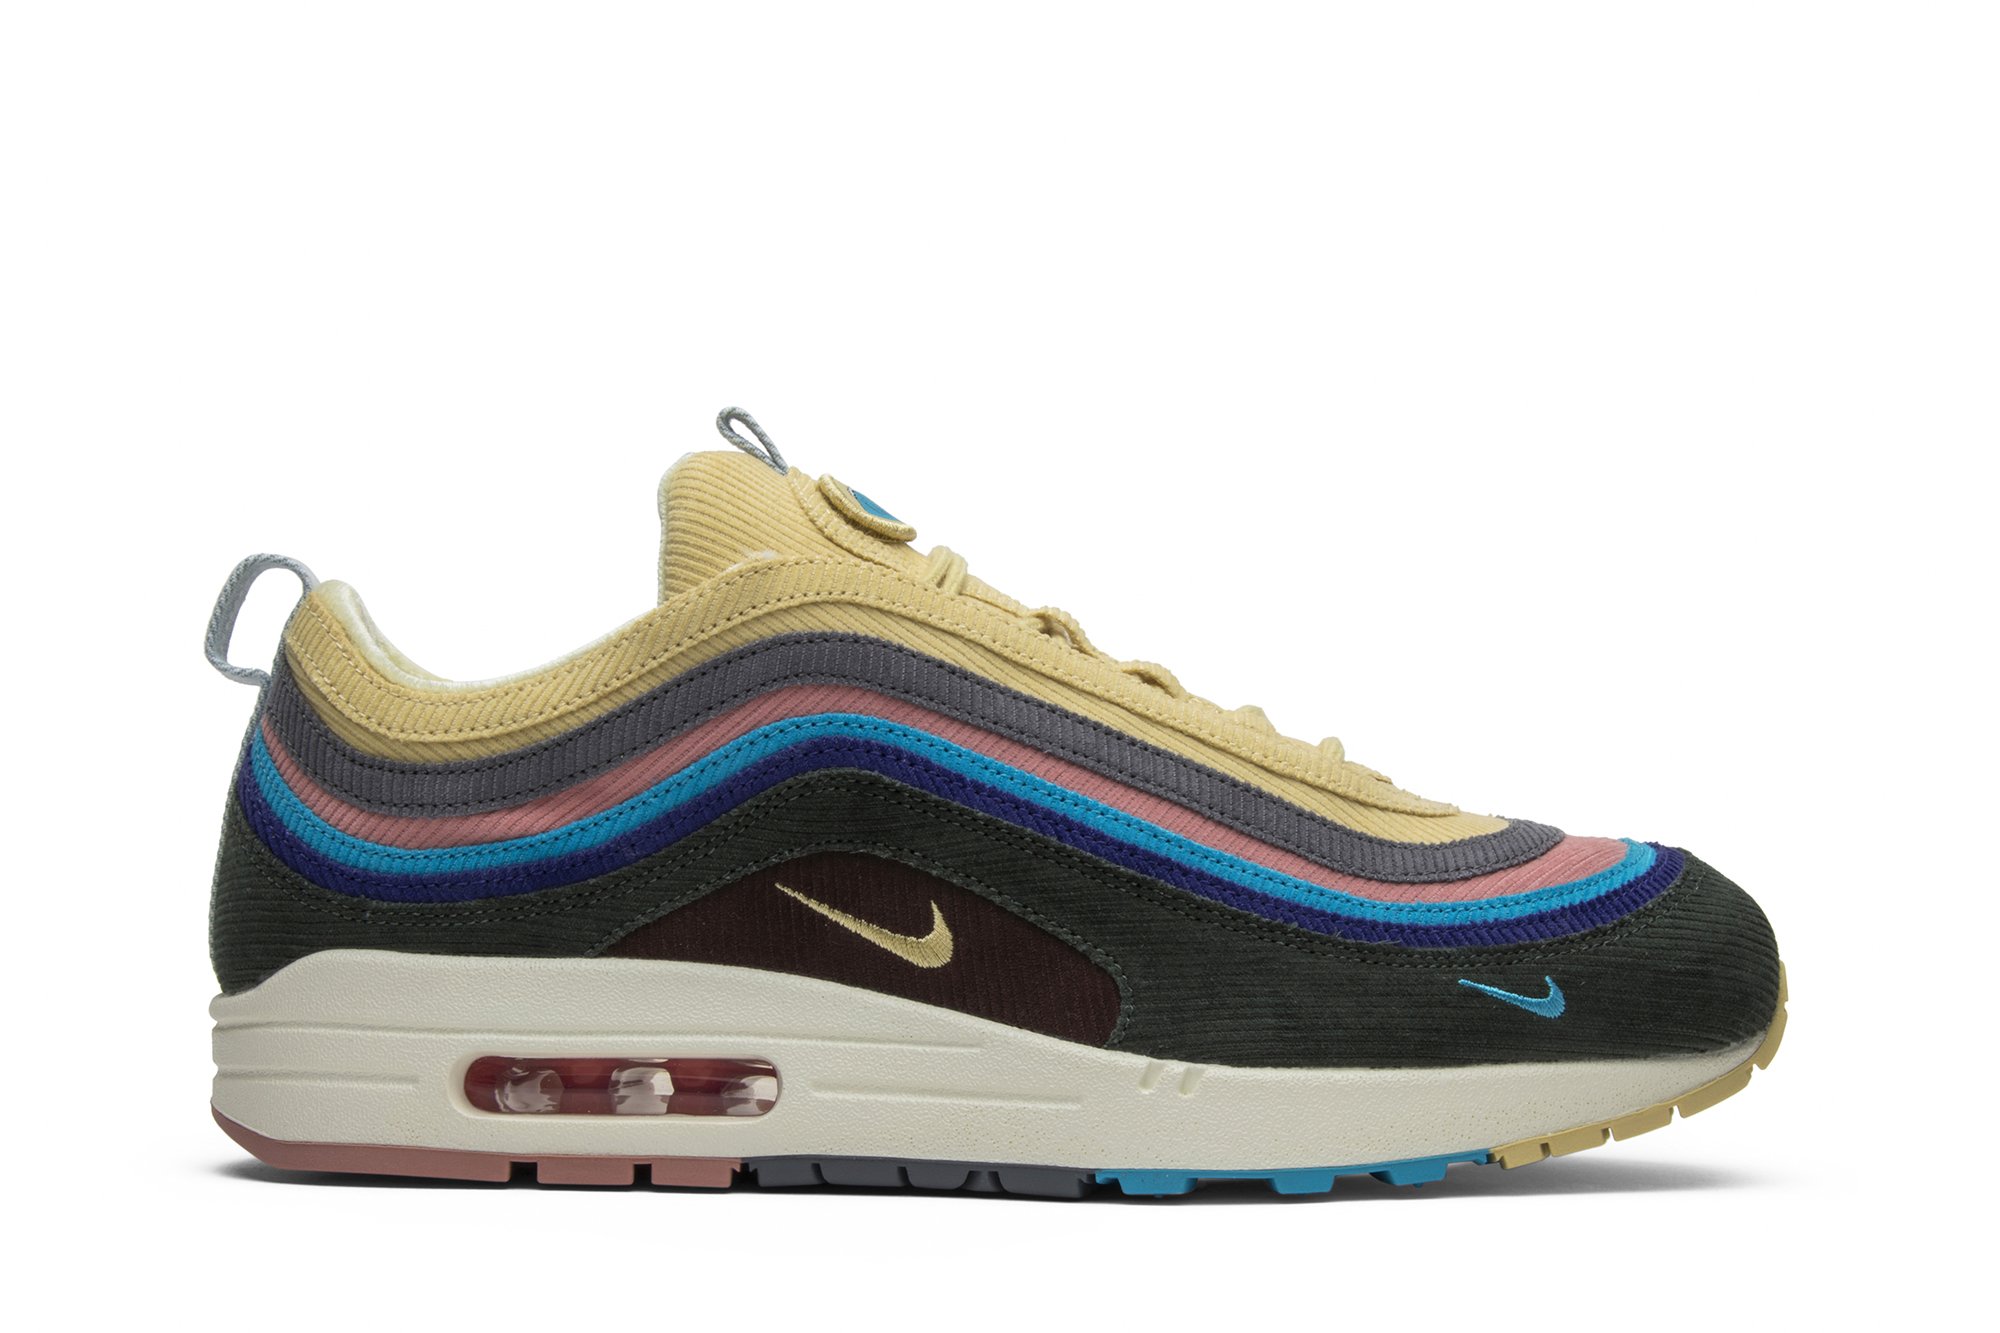 Buy Sean Wotherspoon x Air Max 1/97 - AJ4219 400 - Multi-Color | GOAT